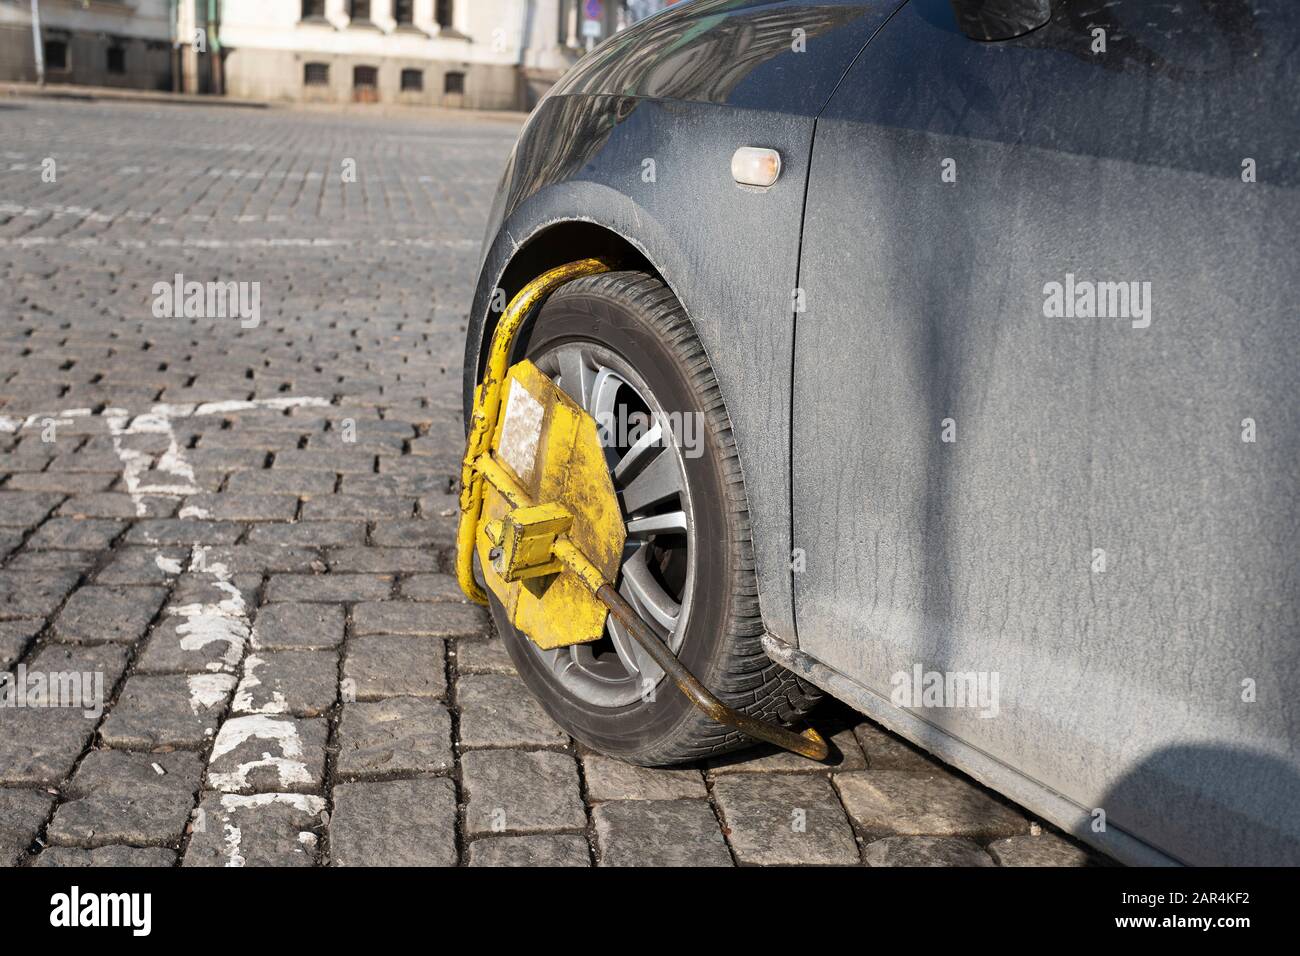 Wheel Clamp-on an illegally parked vehicle Stock Photo